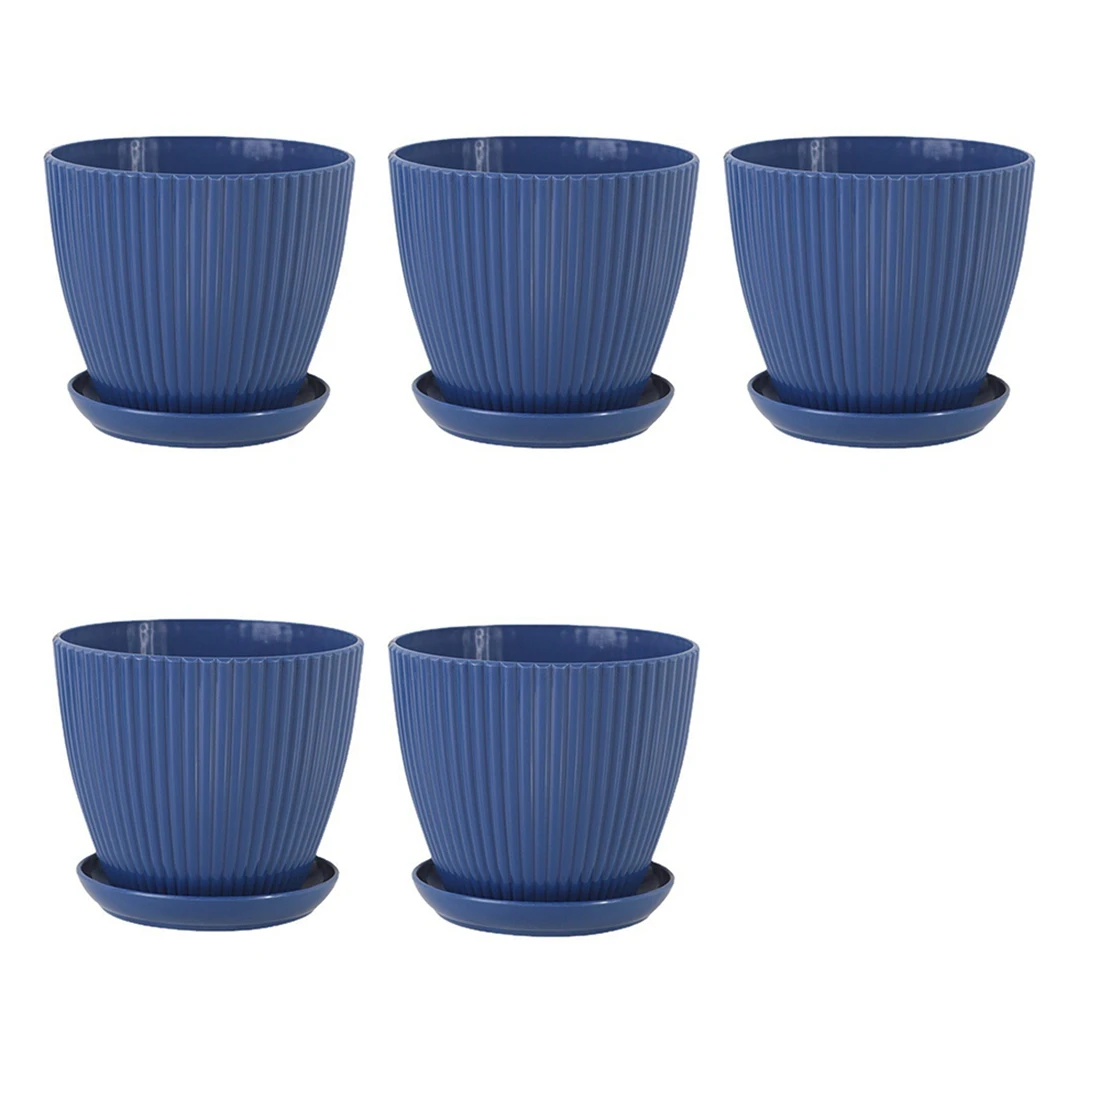 

Plastic Planter Pots for Plants, 5 Pack 6 Inch Flower Pots with Drainage Holes and Saucers, for Indoor Outdoor D